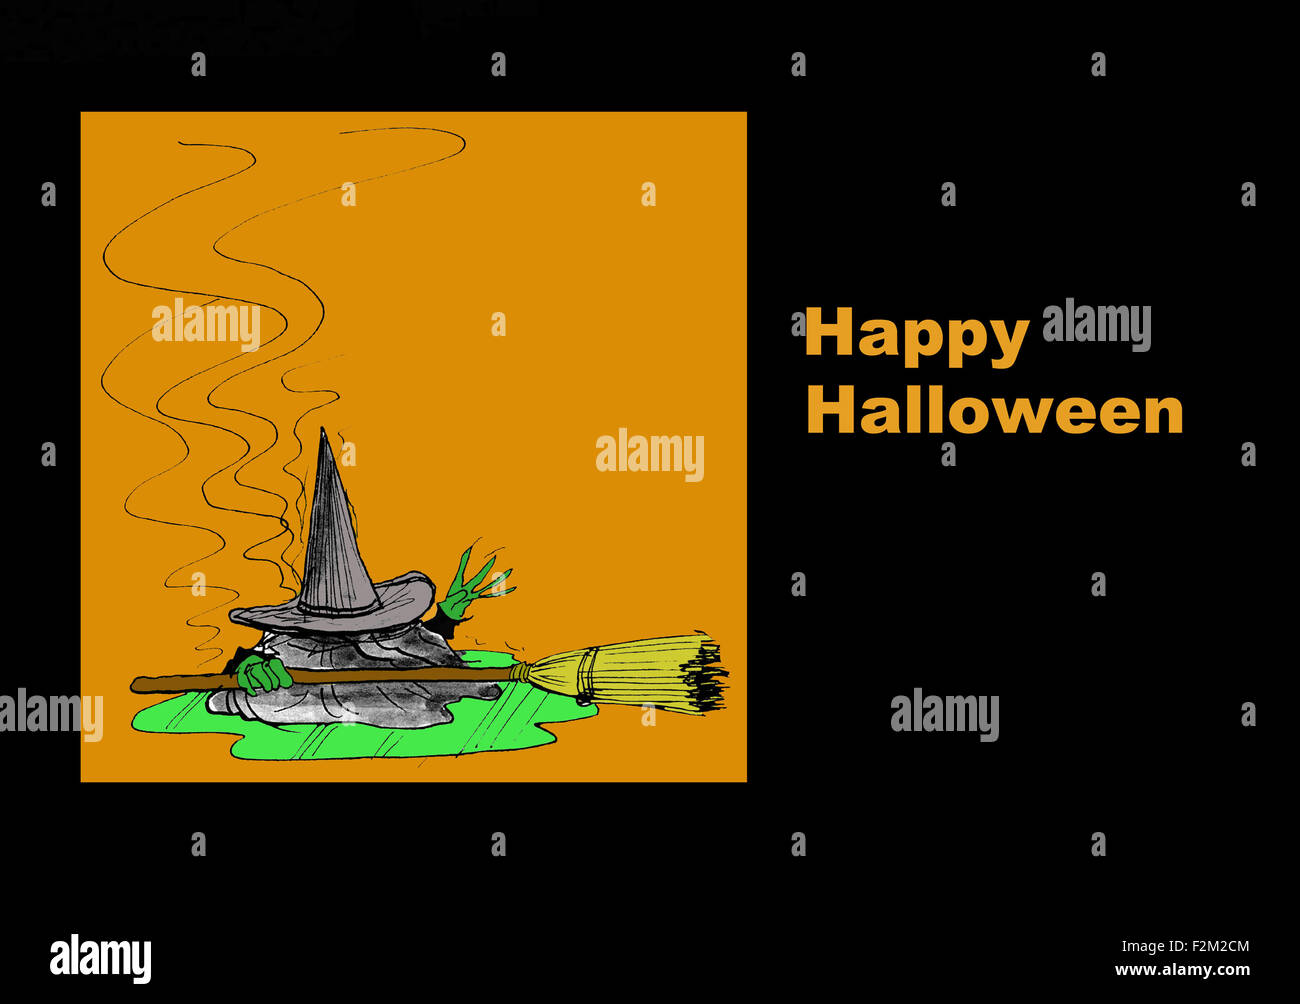 Halloween illustration of wicked witch melting and the words, 'Happy Halloween'. Stock Photo